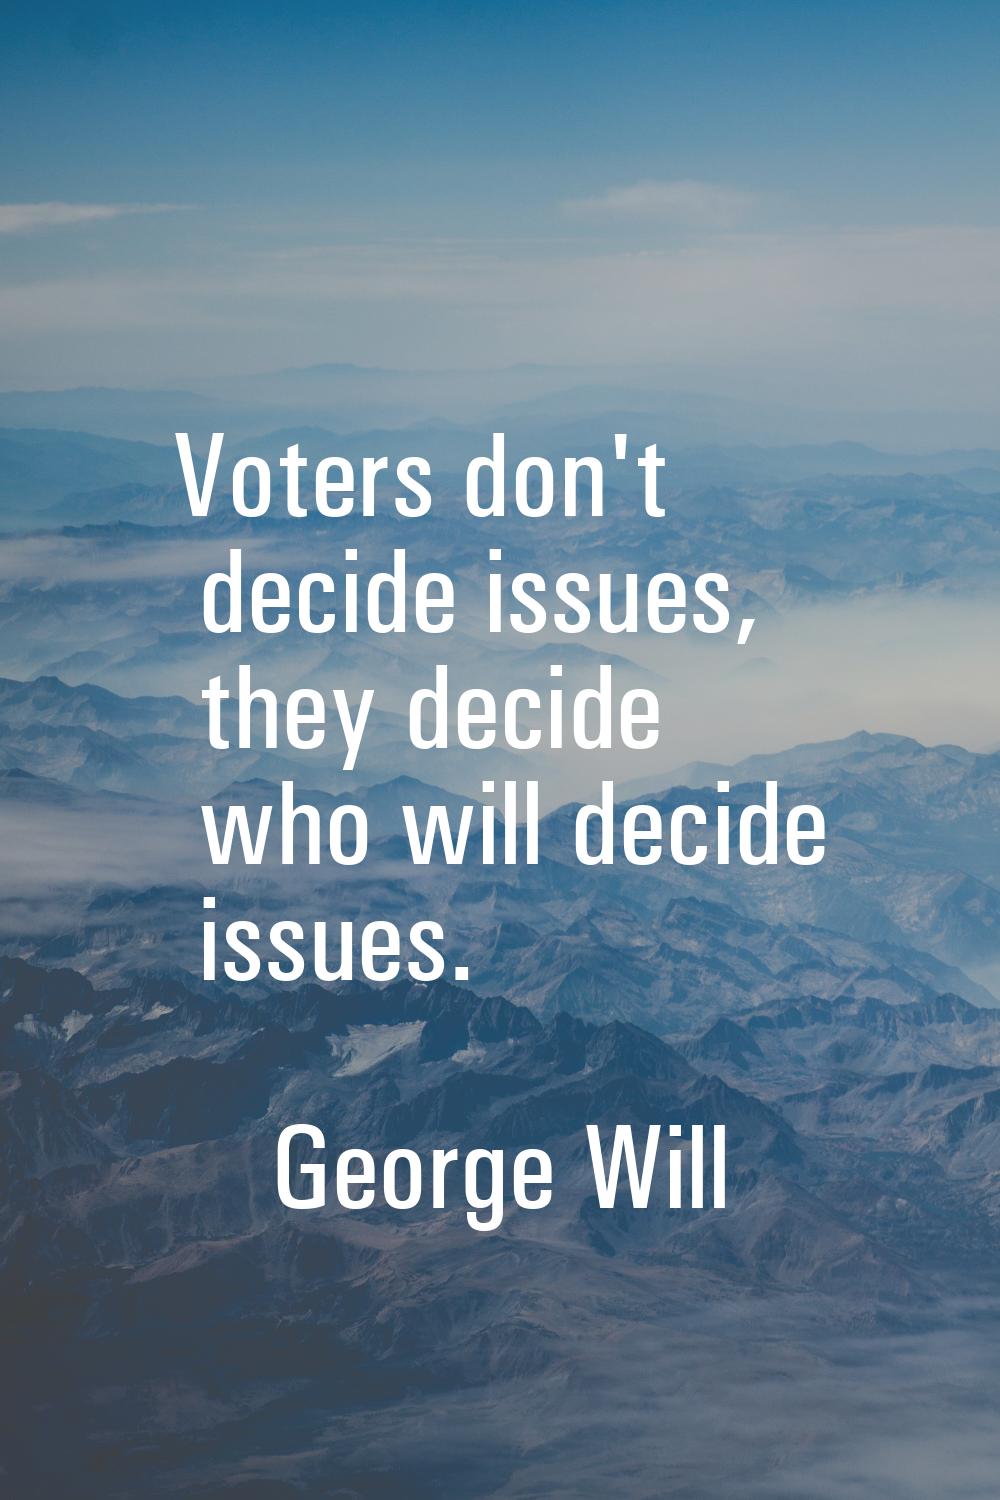 Voters don't decide issues, they decide who will decide issues.